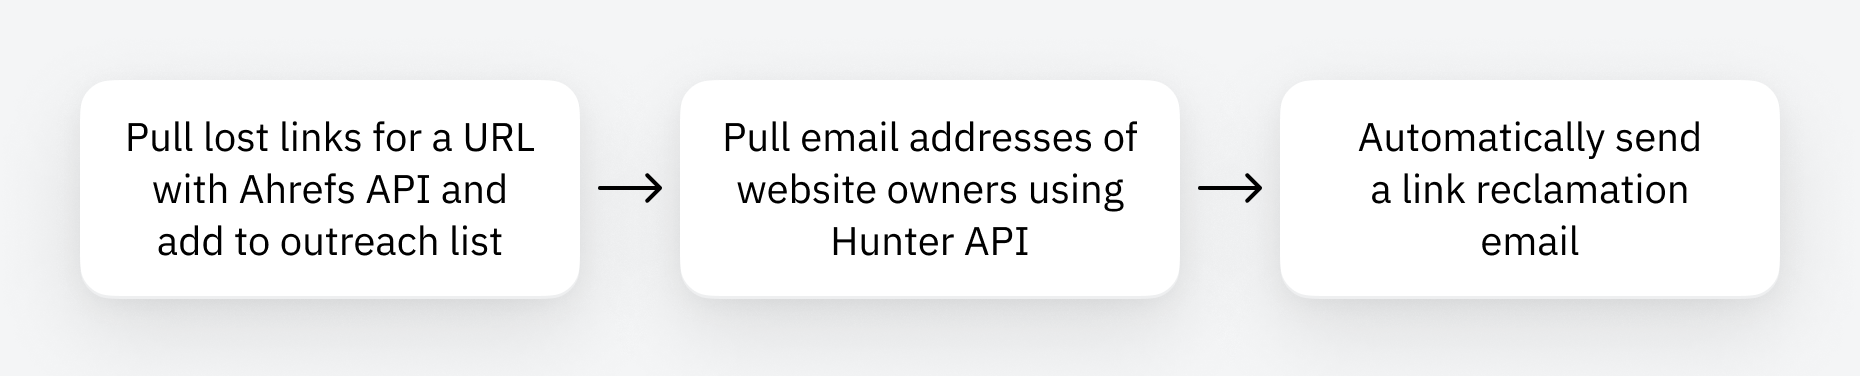 example-link-building-workflow-you-could-build-wit 8 Ahrefs API Use Cases For Agencies and Enterprises